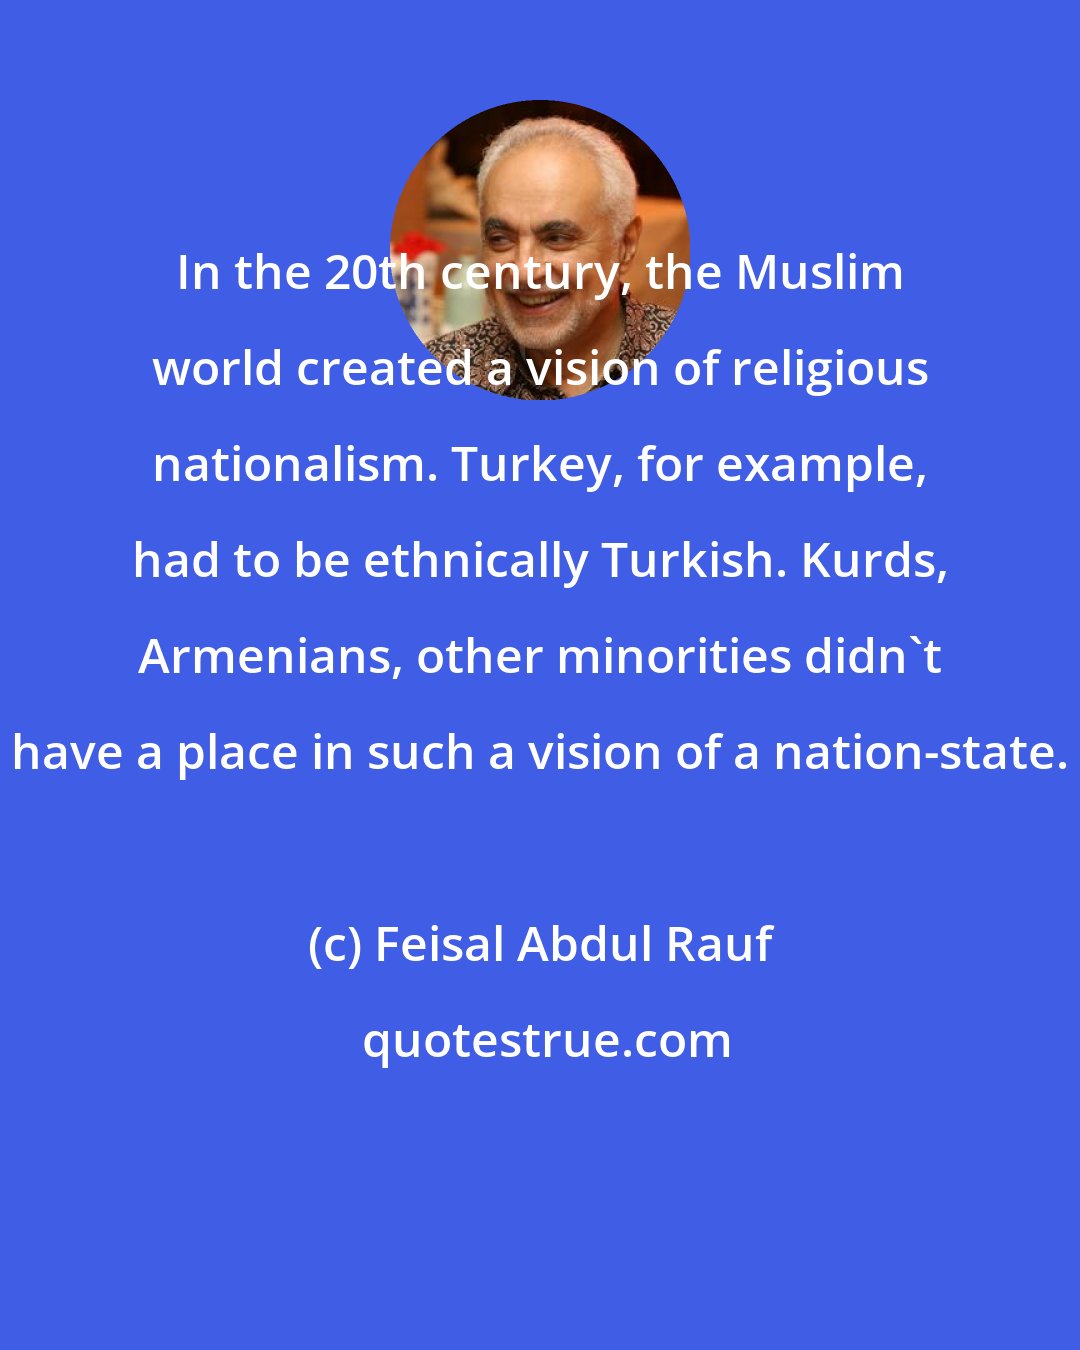 Feisal Abdul Rauf: In the 20th century, the Muslim world created a vision of religious nationalism. Turkey, for example, had to be ethnically Turkish. Kurds, Armenians, other minorities didn't have a place in such a vision of a nation-state.